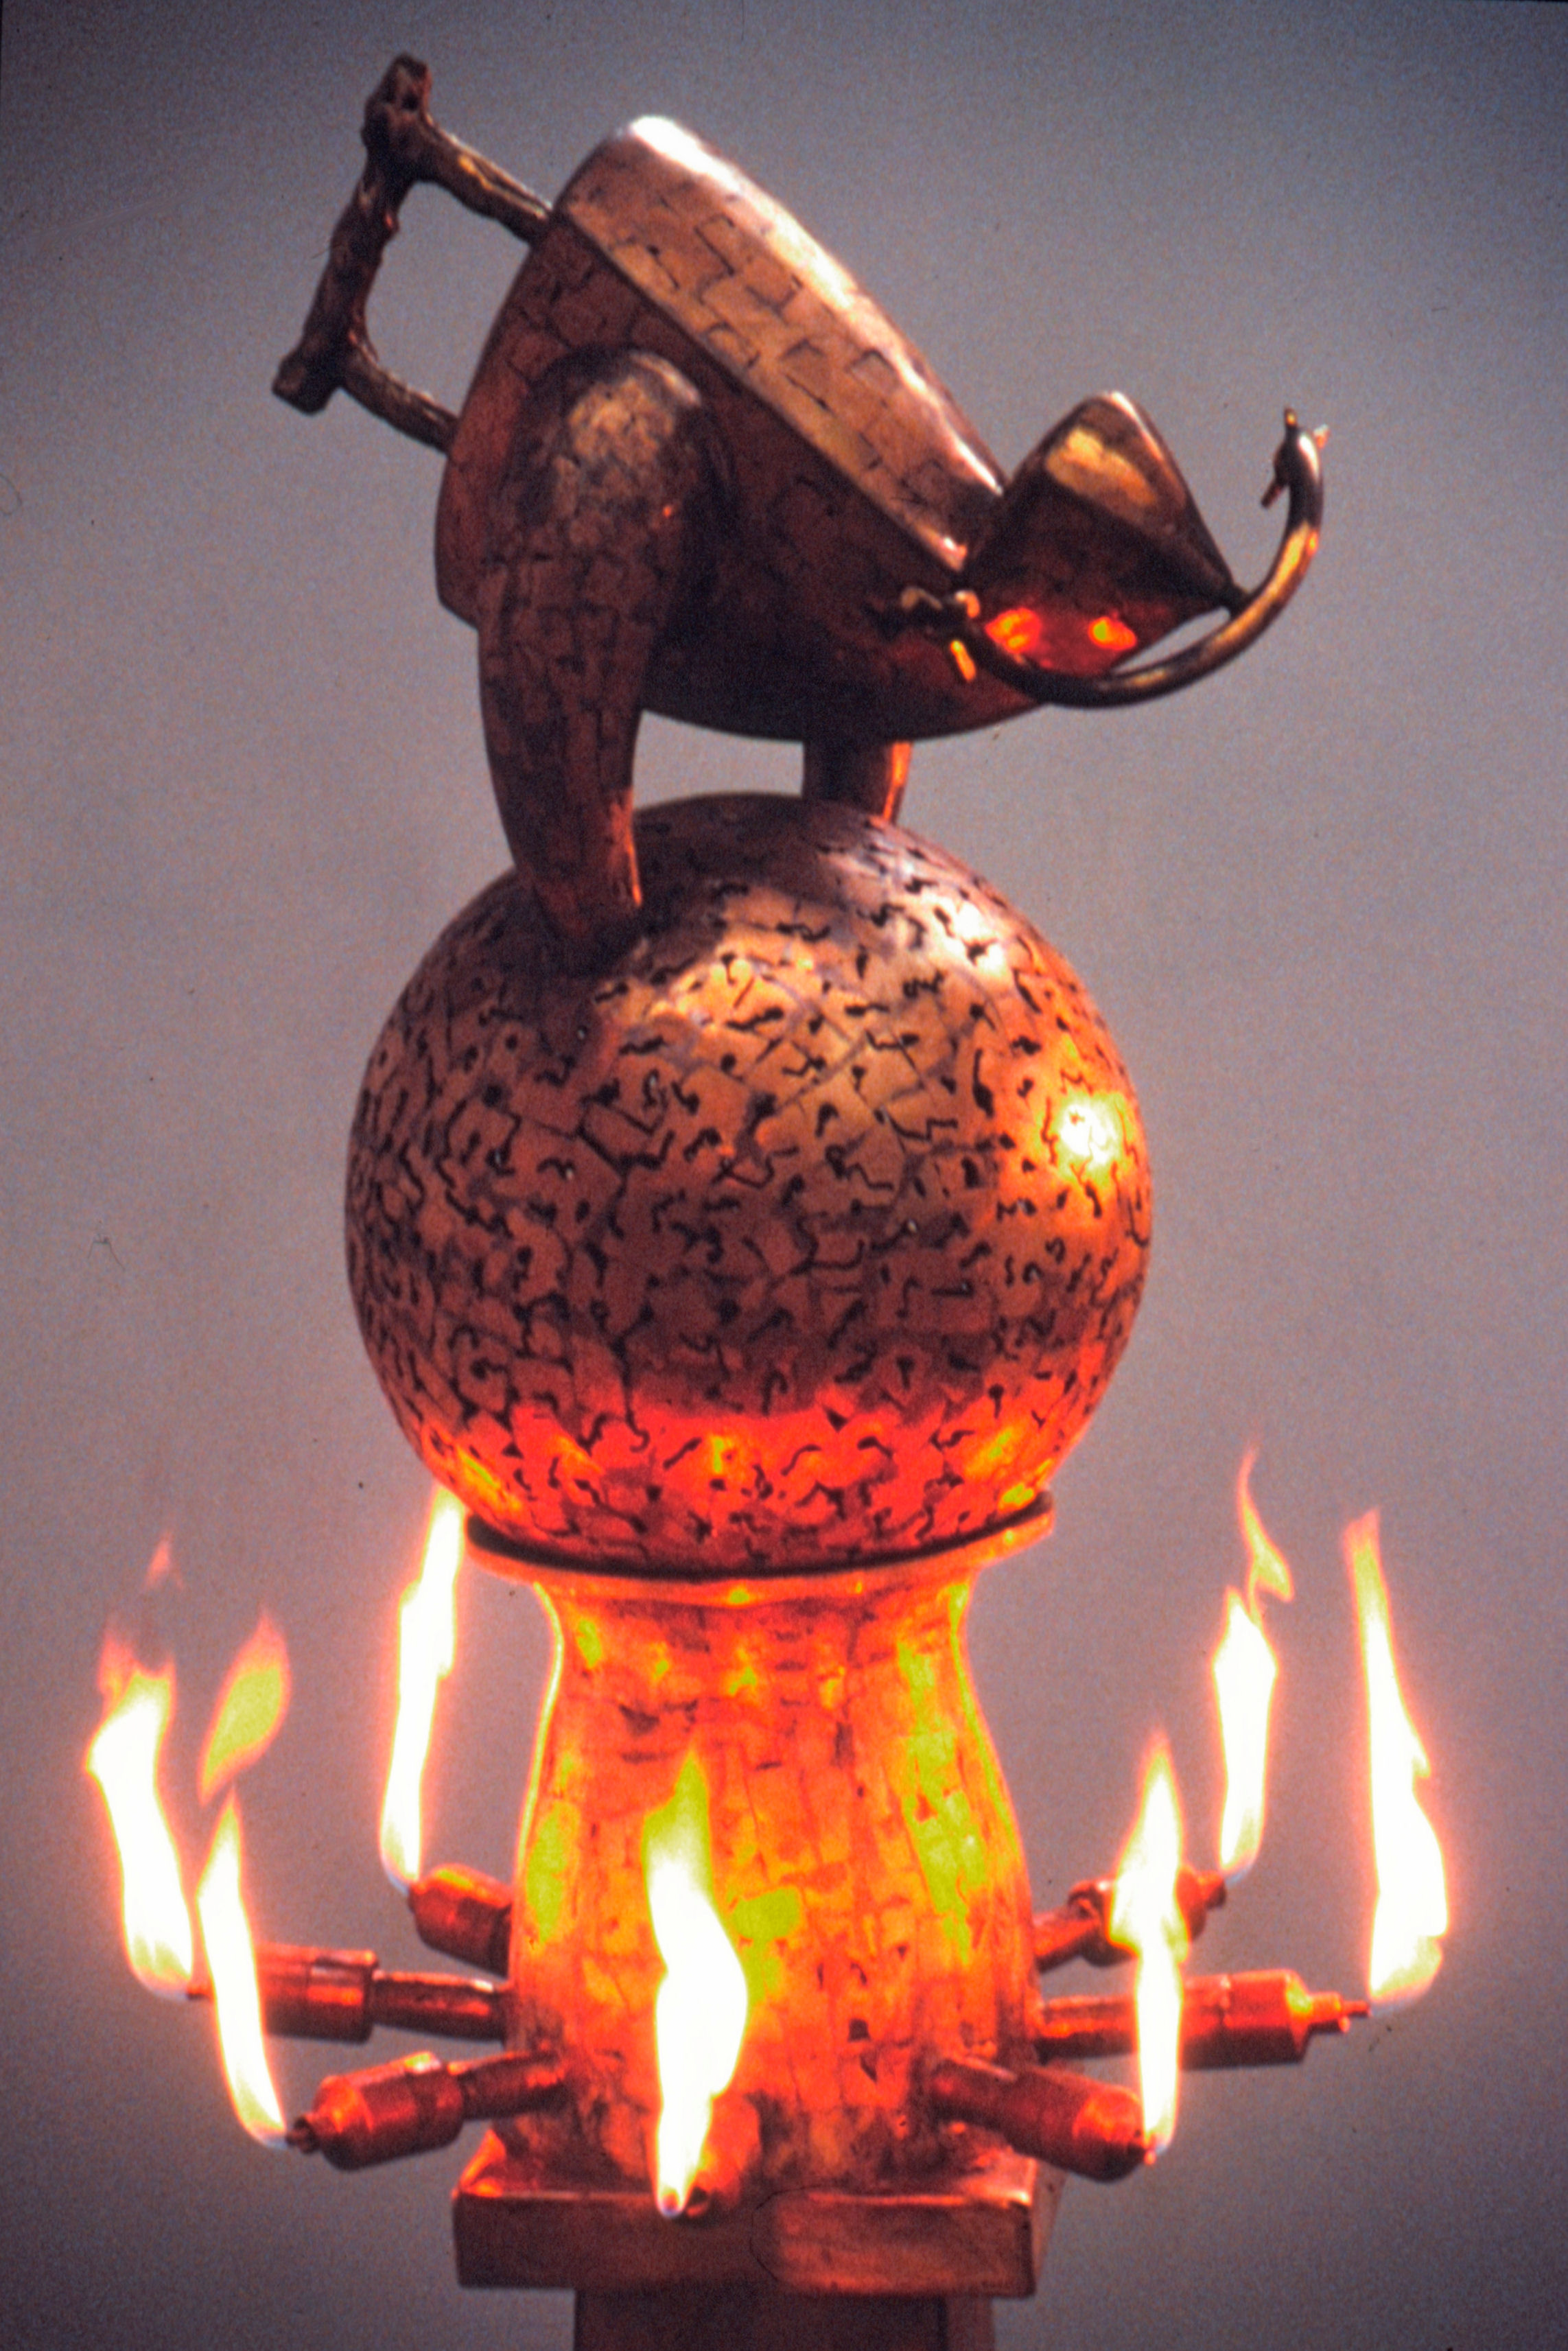 Fire for Biko (Cauldron Element & Acoustic Sphere) - 1990, 
Uni-constructed Bronze with Patina
